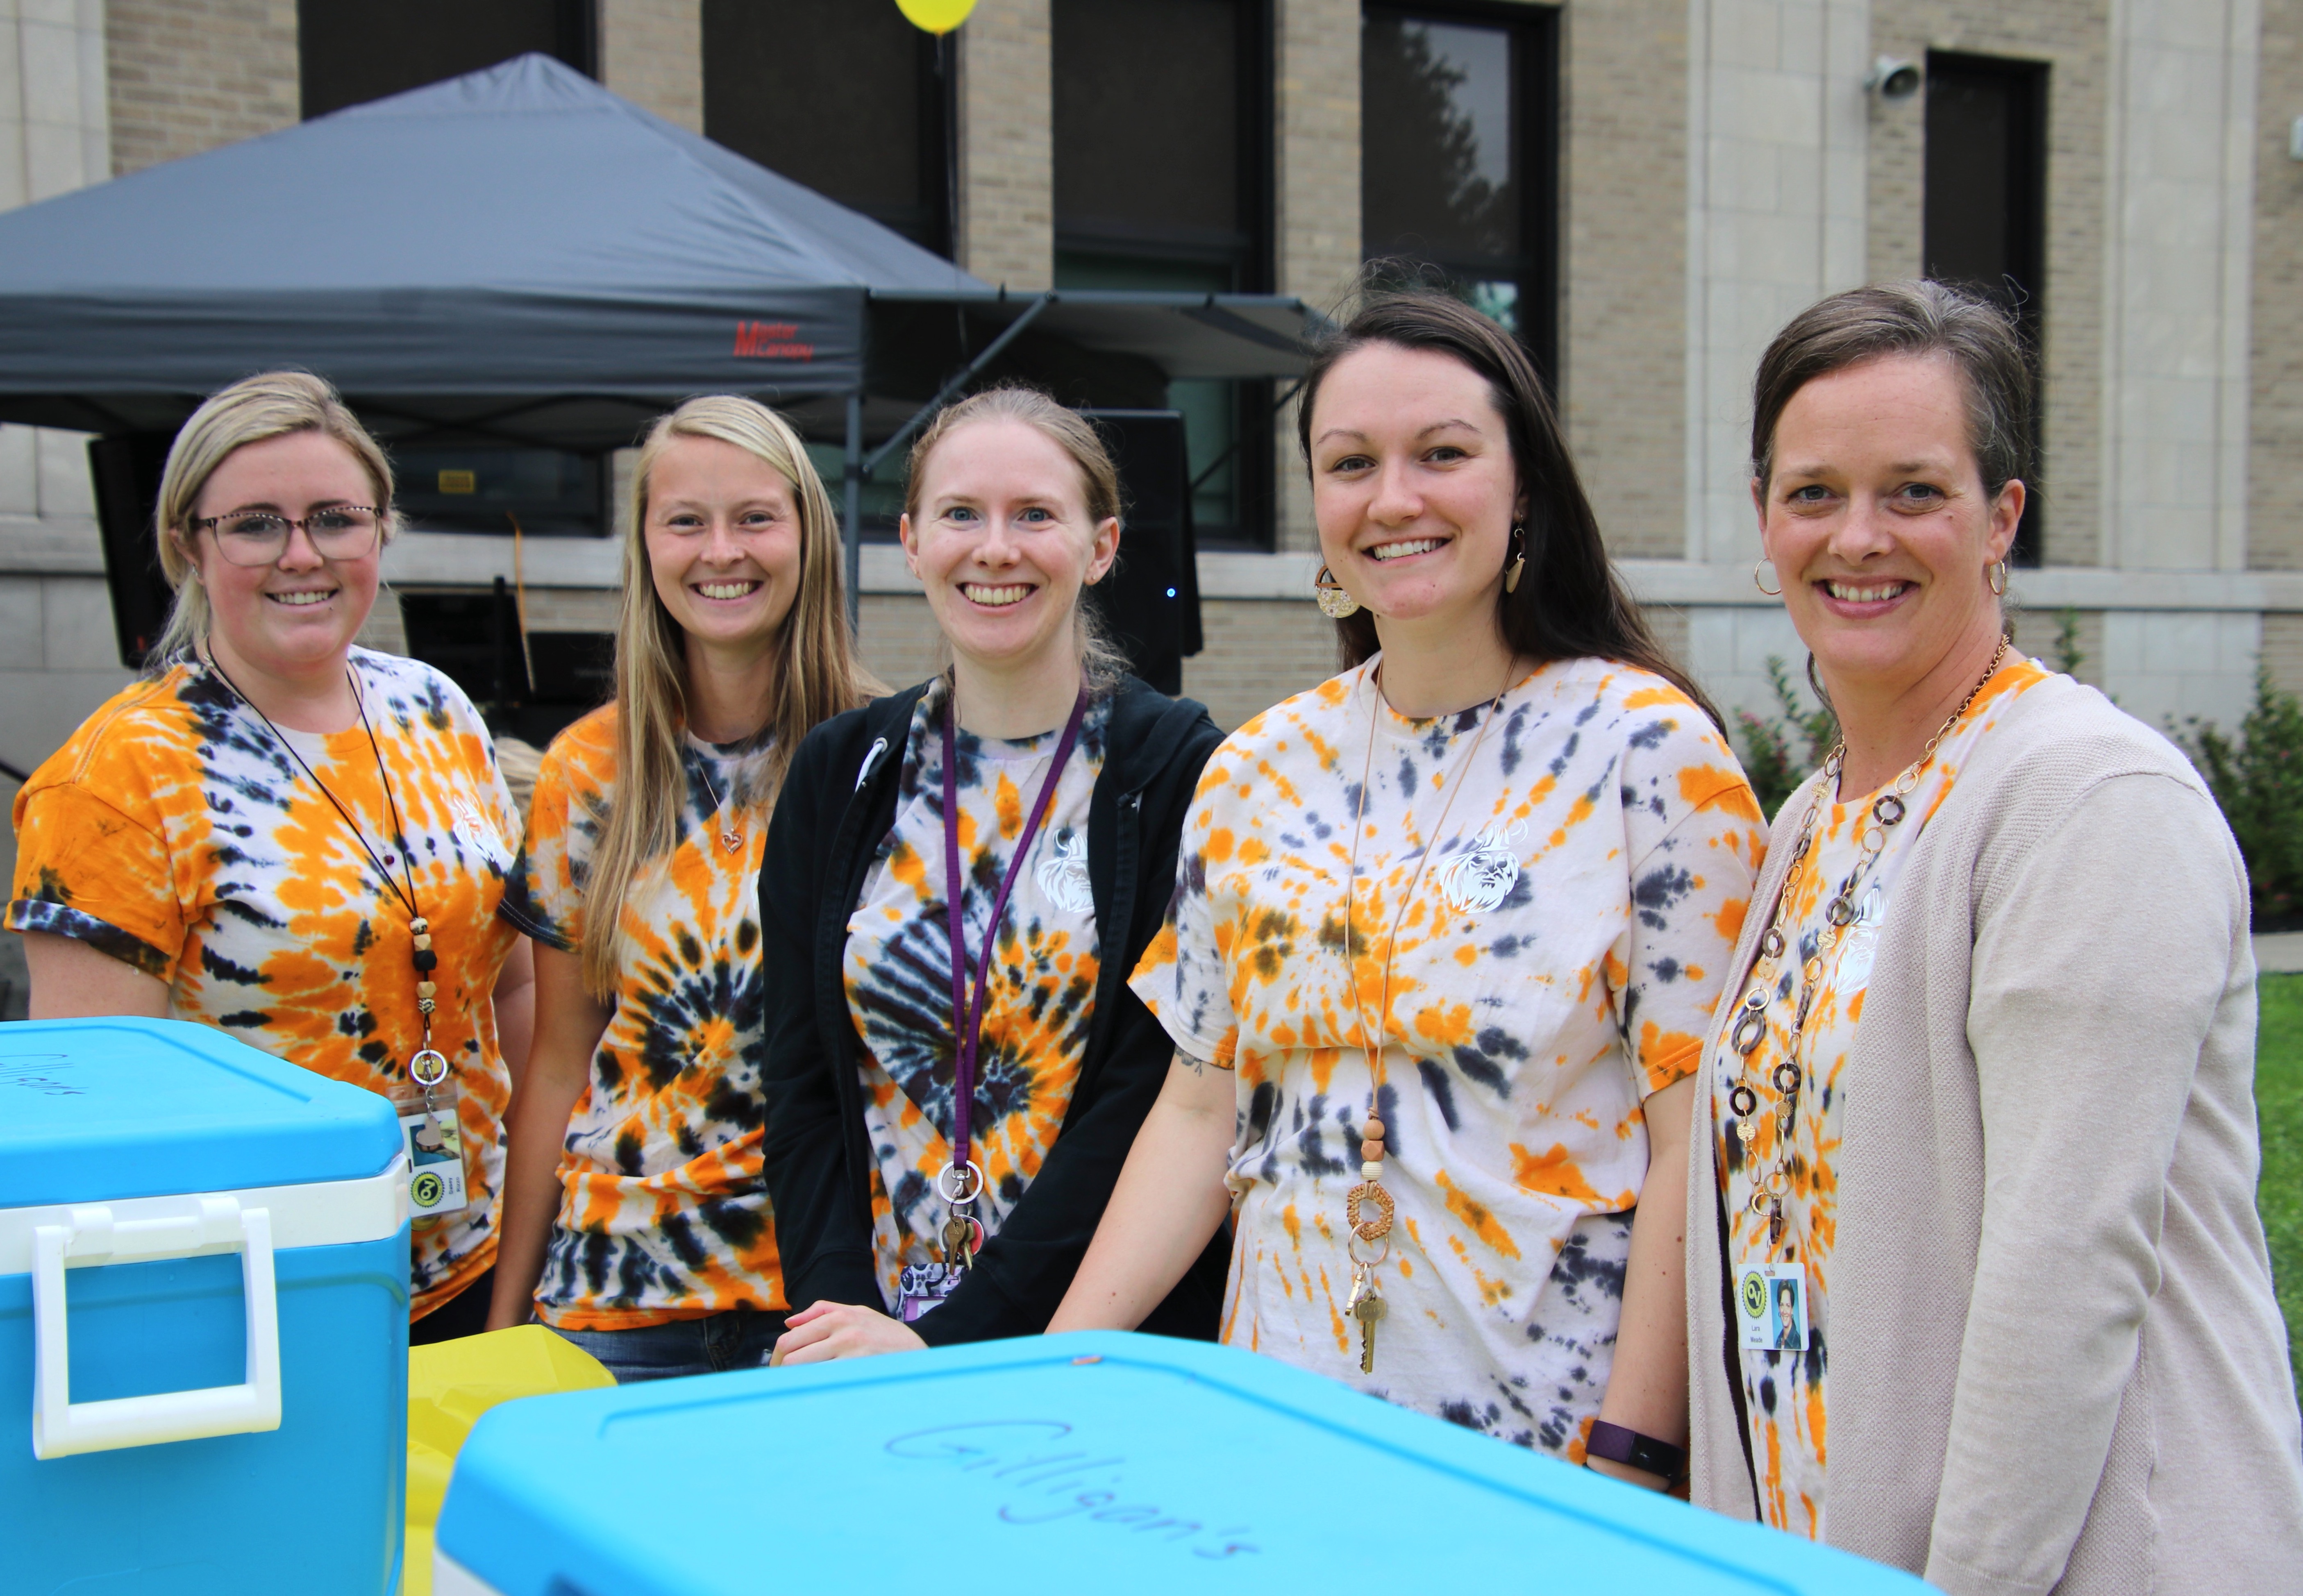 A group of 5 young female teachers all wearing tie-dye t-shirts stand outside a school building at a special back-to-school event